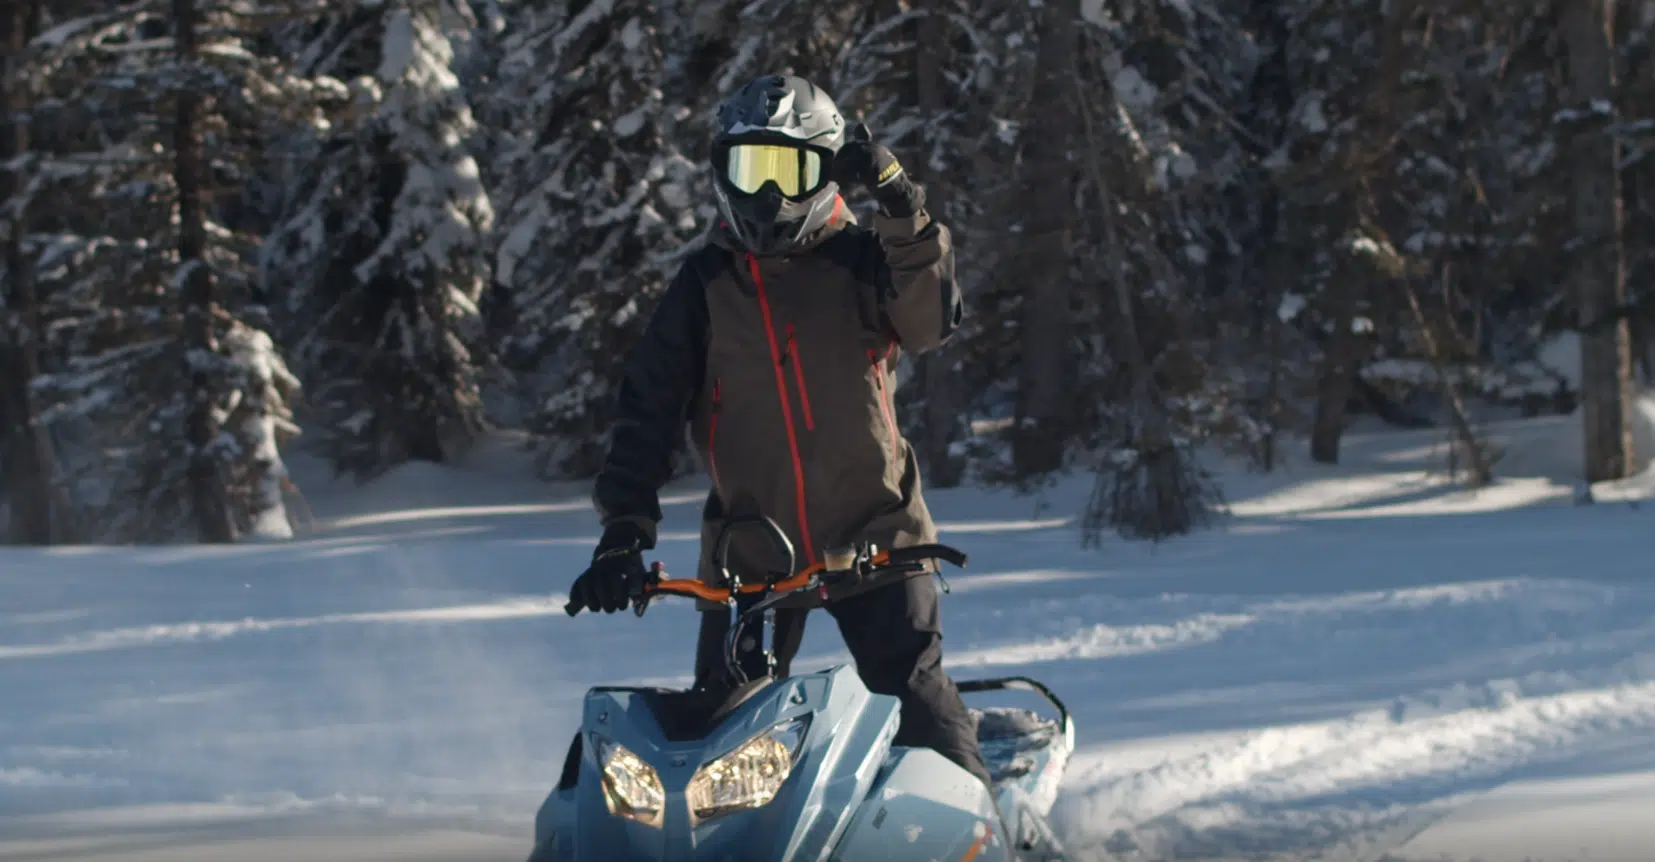 The basics of off trail snowmobiling with Ski-Doo